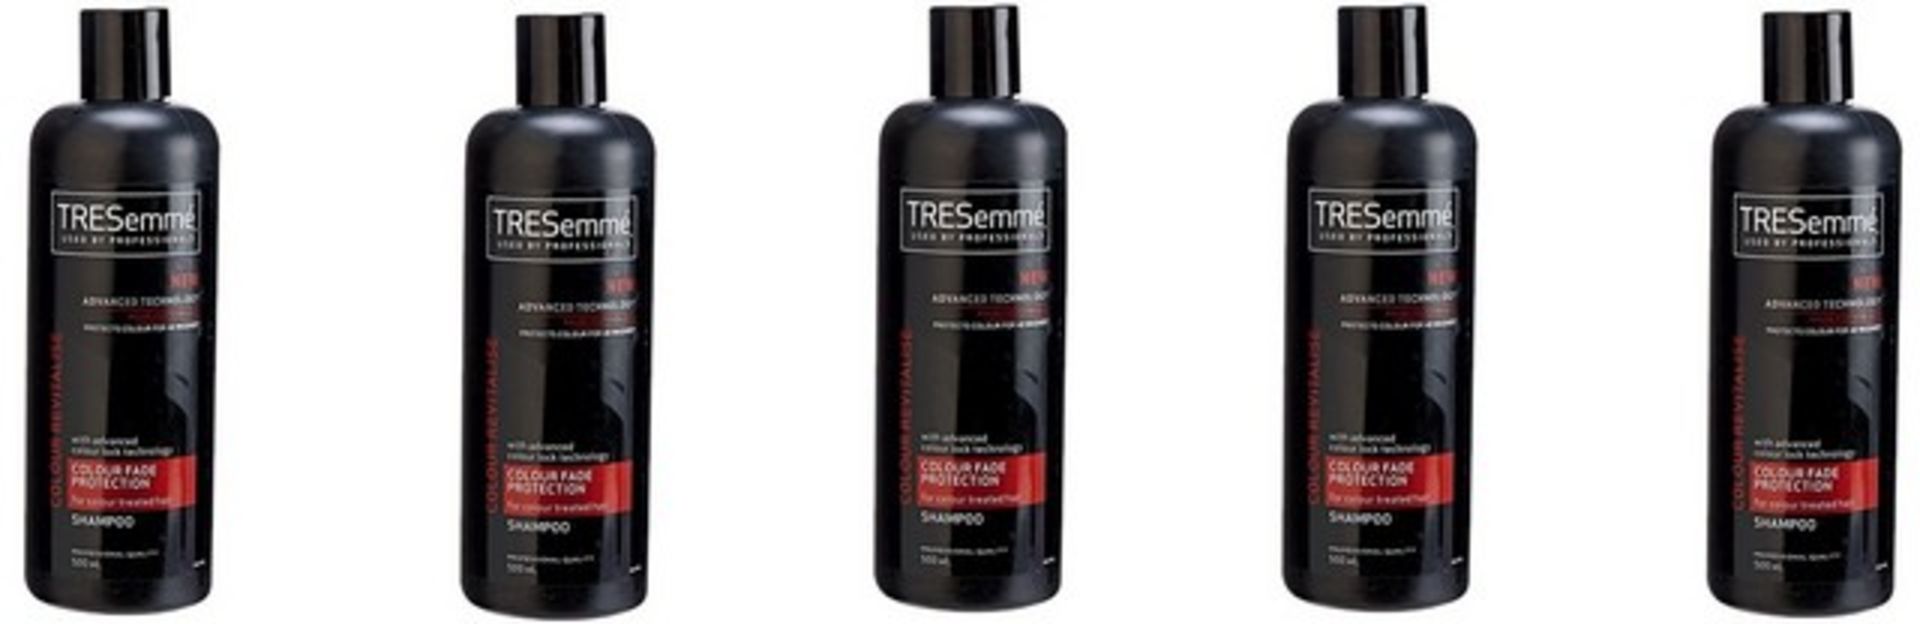 V Brand New A Lot Of Five 500ml TRESemme Colour Revitalise Colour Fade Protection Shampoo ISP £24.75